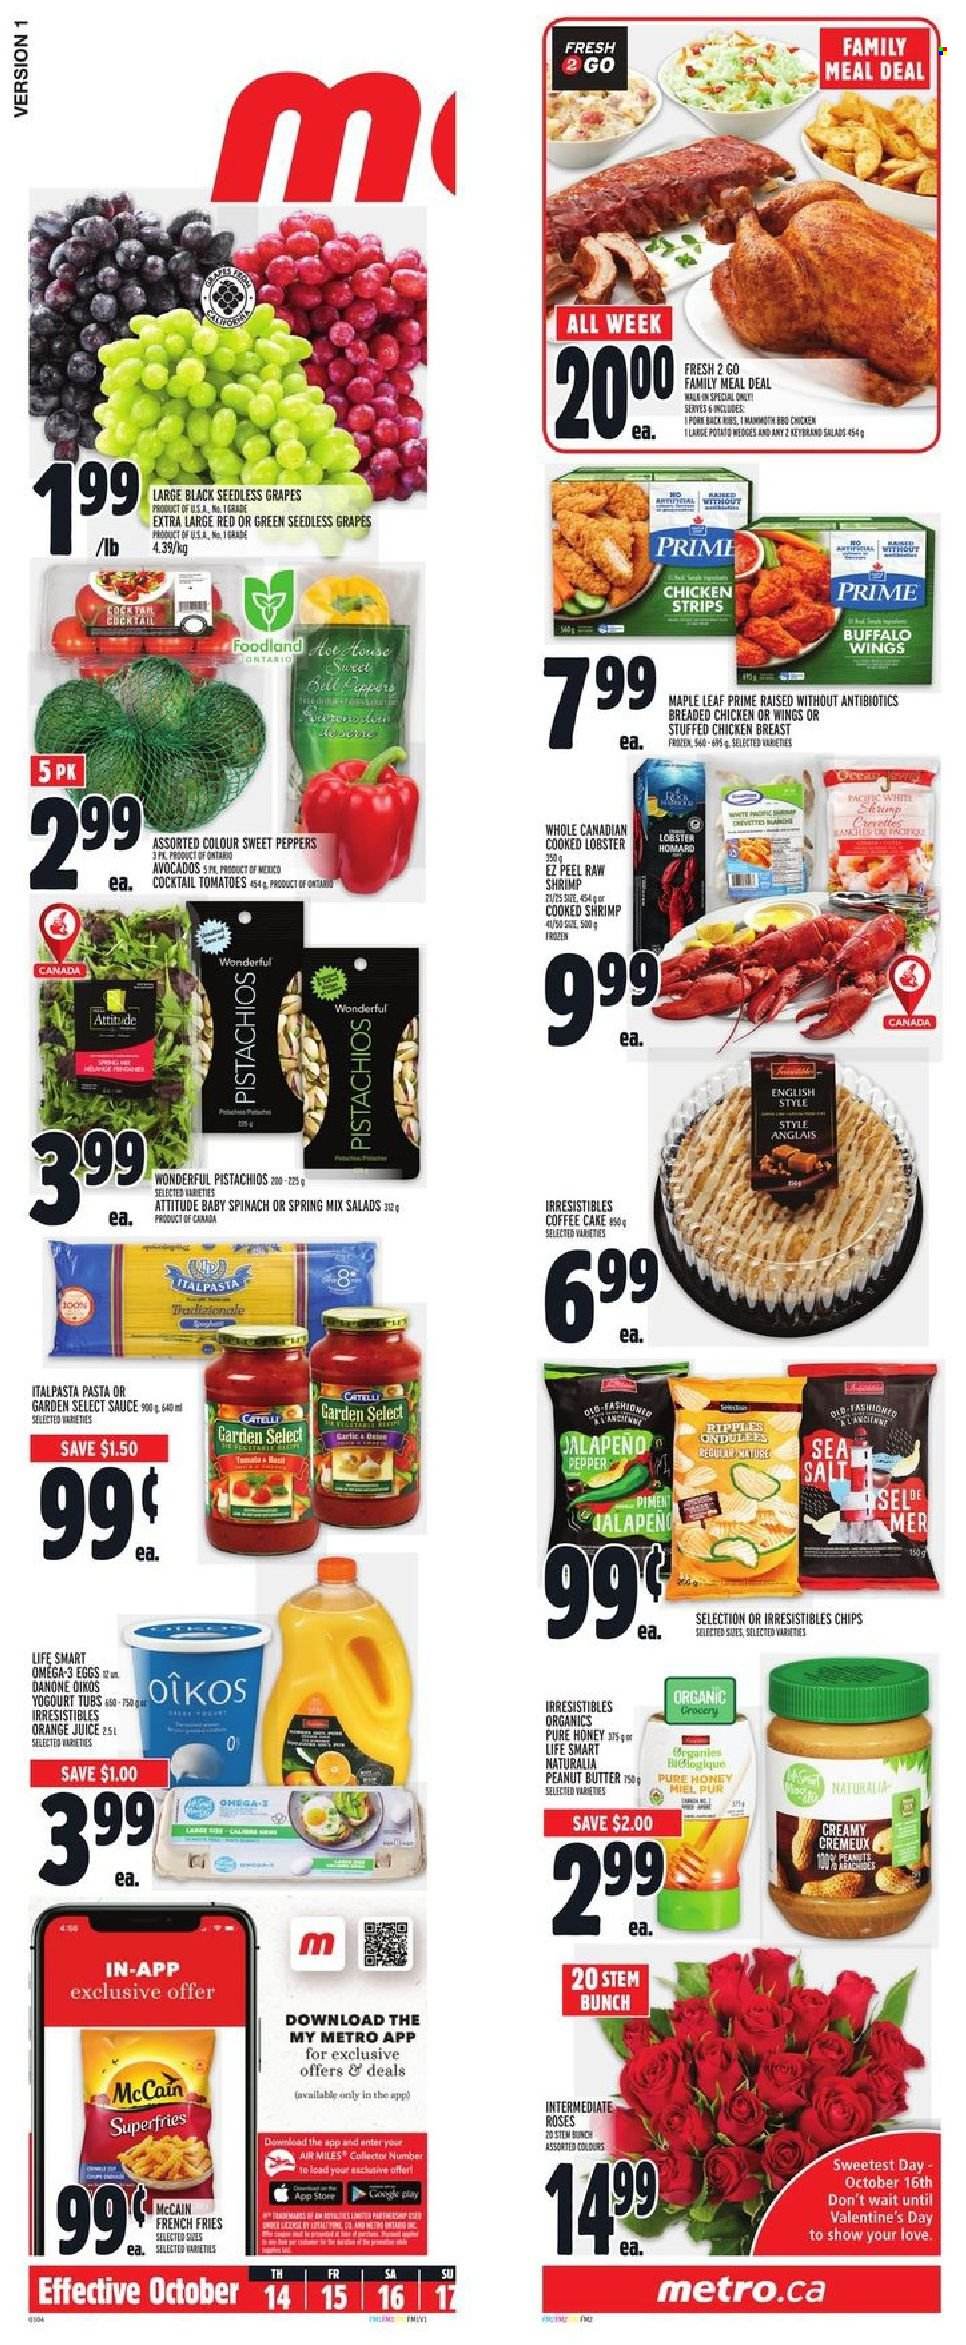 thumbnail - Metro Flyer - October 14, 2021 - October 20, 2021 - Sales products - cake, coffee cake, sweet peppers, tomatoes, peppers, avocado, grapes, seedless grapes, lobster, shrimps, sauce, fried chicken, stuffed chicken, Oikos, strips, chicken strips, McCain, potato fries, french fries, honey, peanut butter, pistachios, orange juice, juice, chicken, rose, Omega-3, Danone. Page 14.